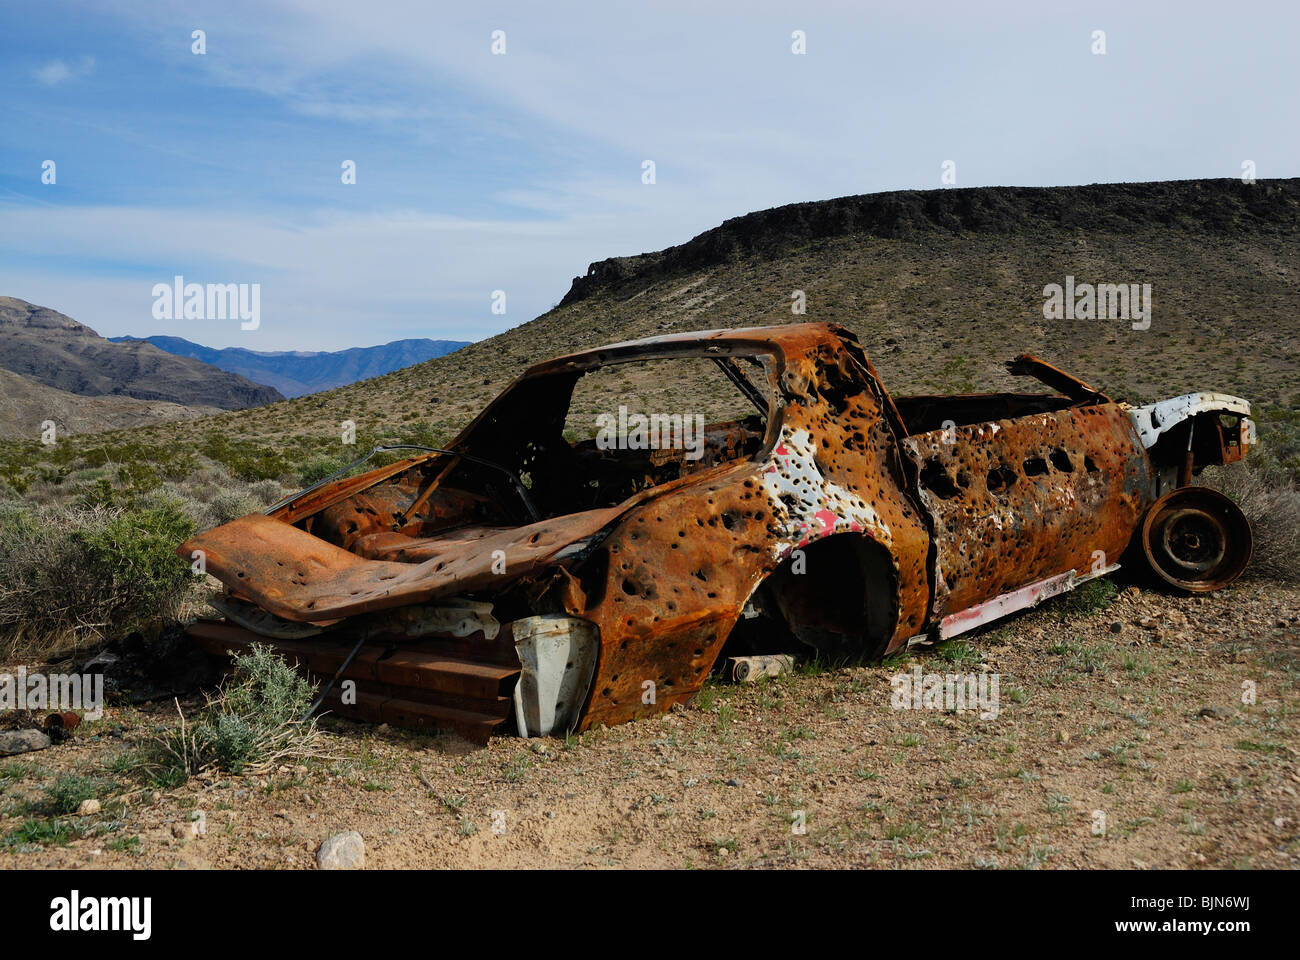 Abandoned and rusted car riddled with bullets along a road in Death Valley, California state Stock Photo